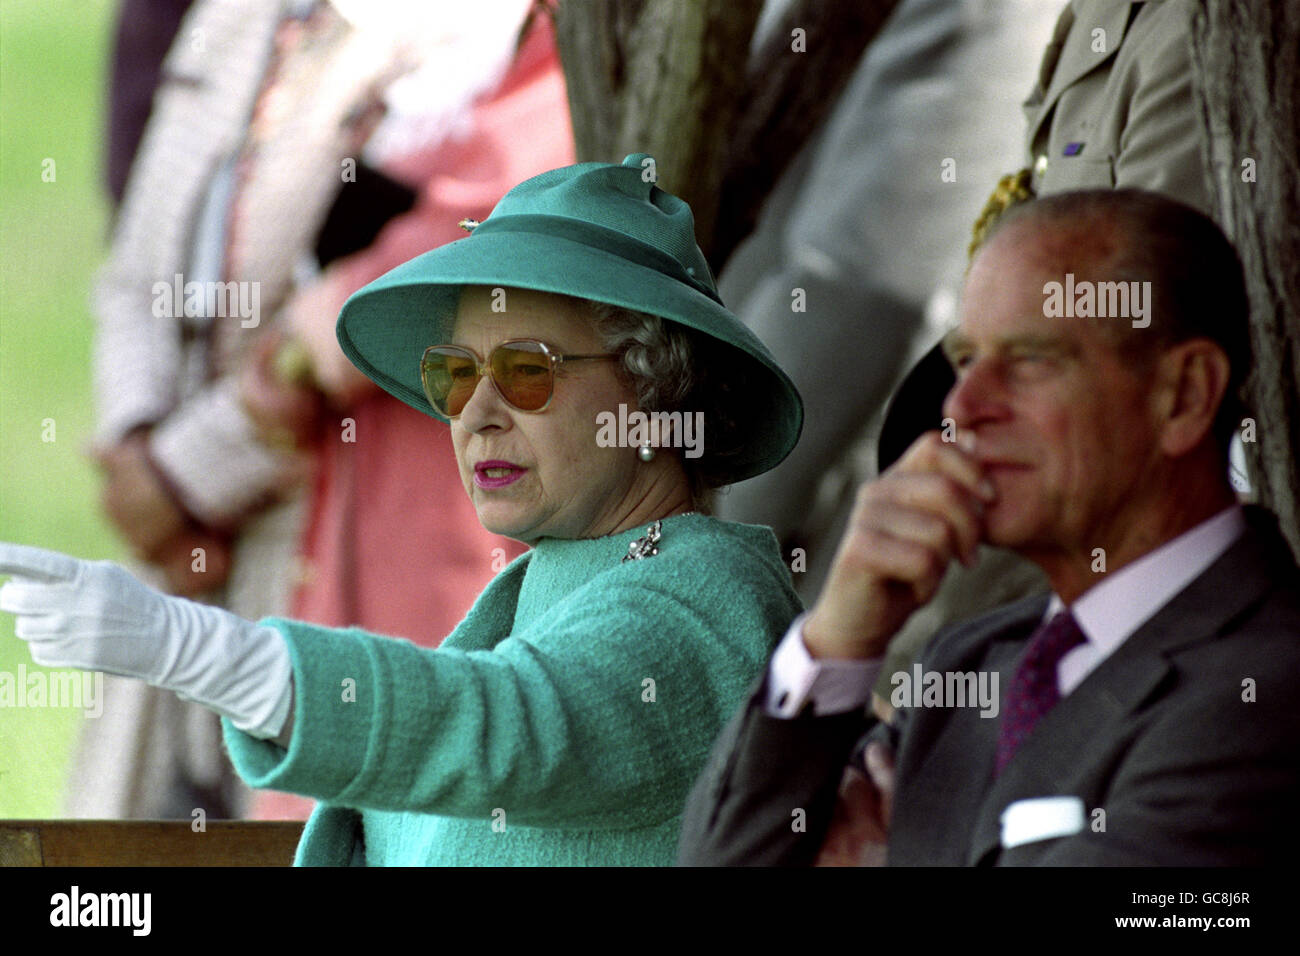 WE ARE AMUSED ...BRITAIN'S QUEEN ELIZABETH II LAUGHS AS SHE WATCHES A DISPLAY OF TRADITIONAL SKILLS BY HUNGARIAN HORSEMEN ON THE PLAINS AT BUGAC. THE QUEEN AND PRINCE PHILIP HAD ARRIVED AT THE DISPLAY IN A HORSE-DRAWN CARRIAGE FROM A NEARBY PICNIC. Stock Photo